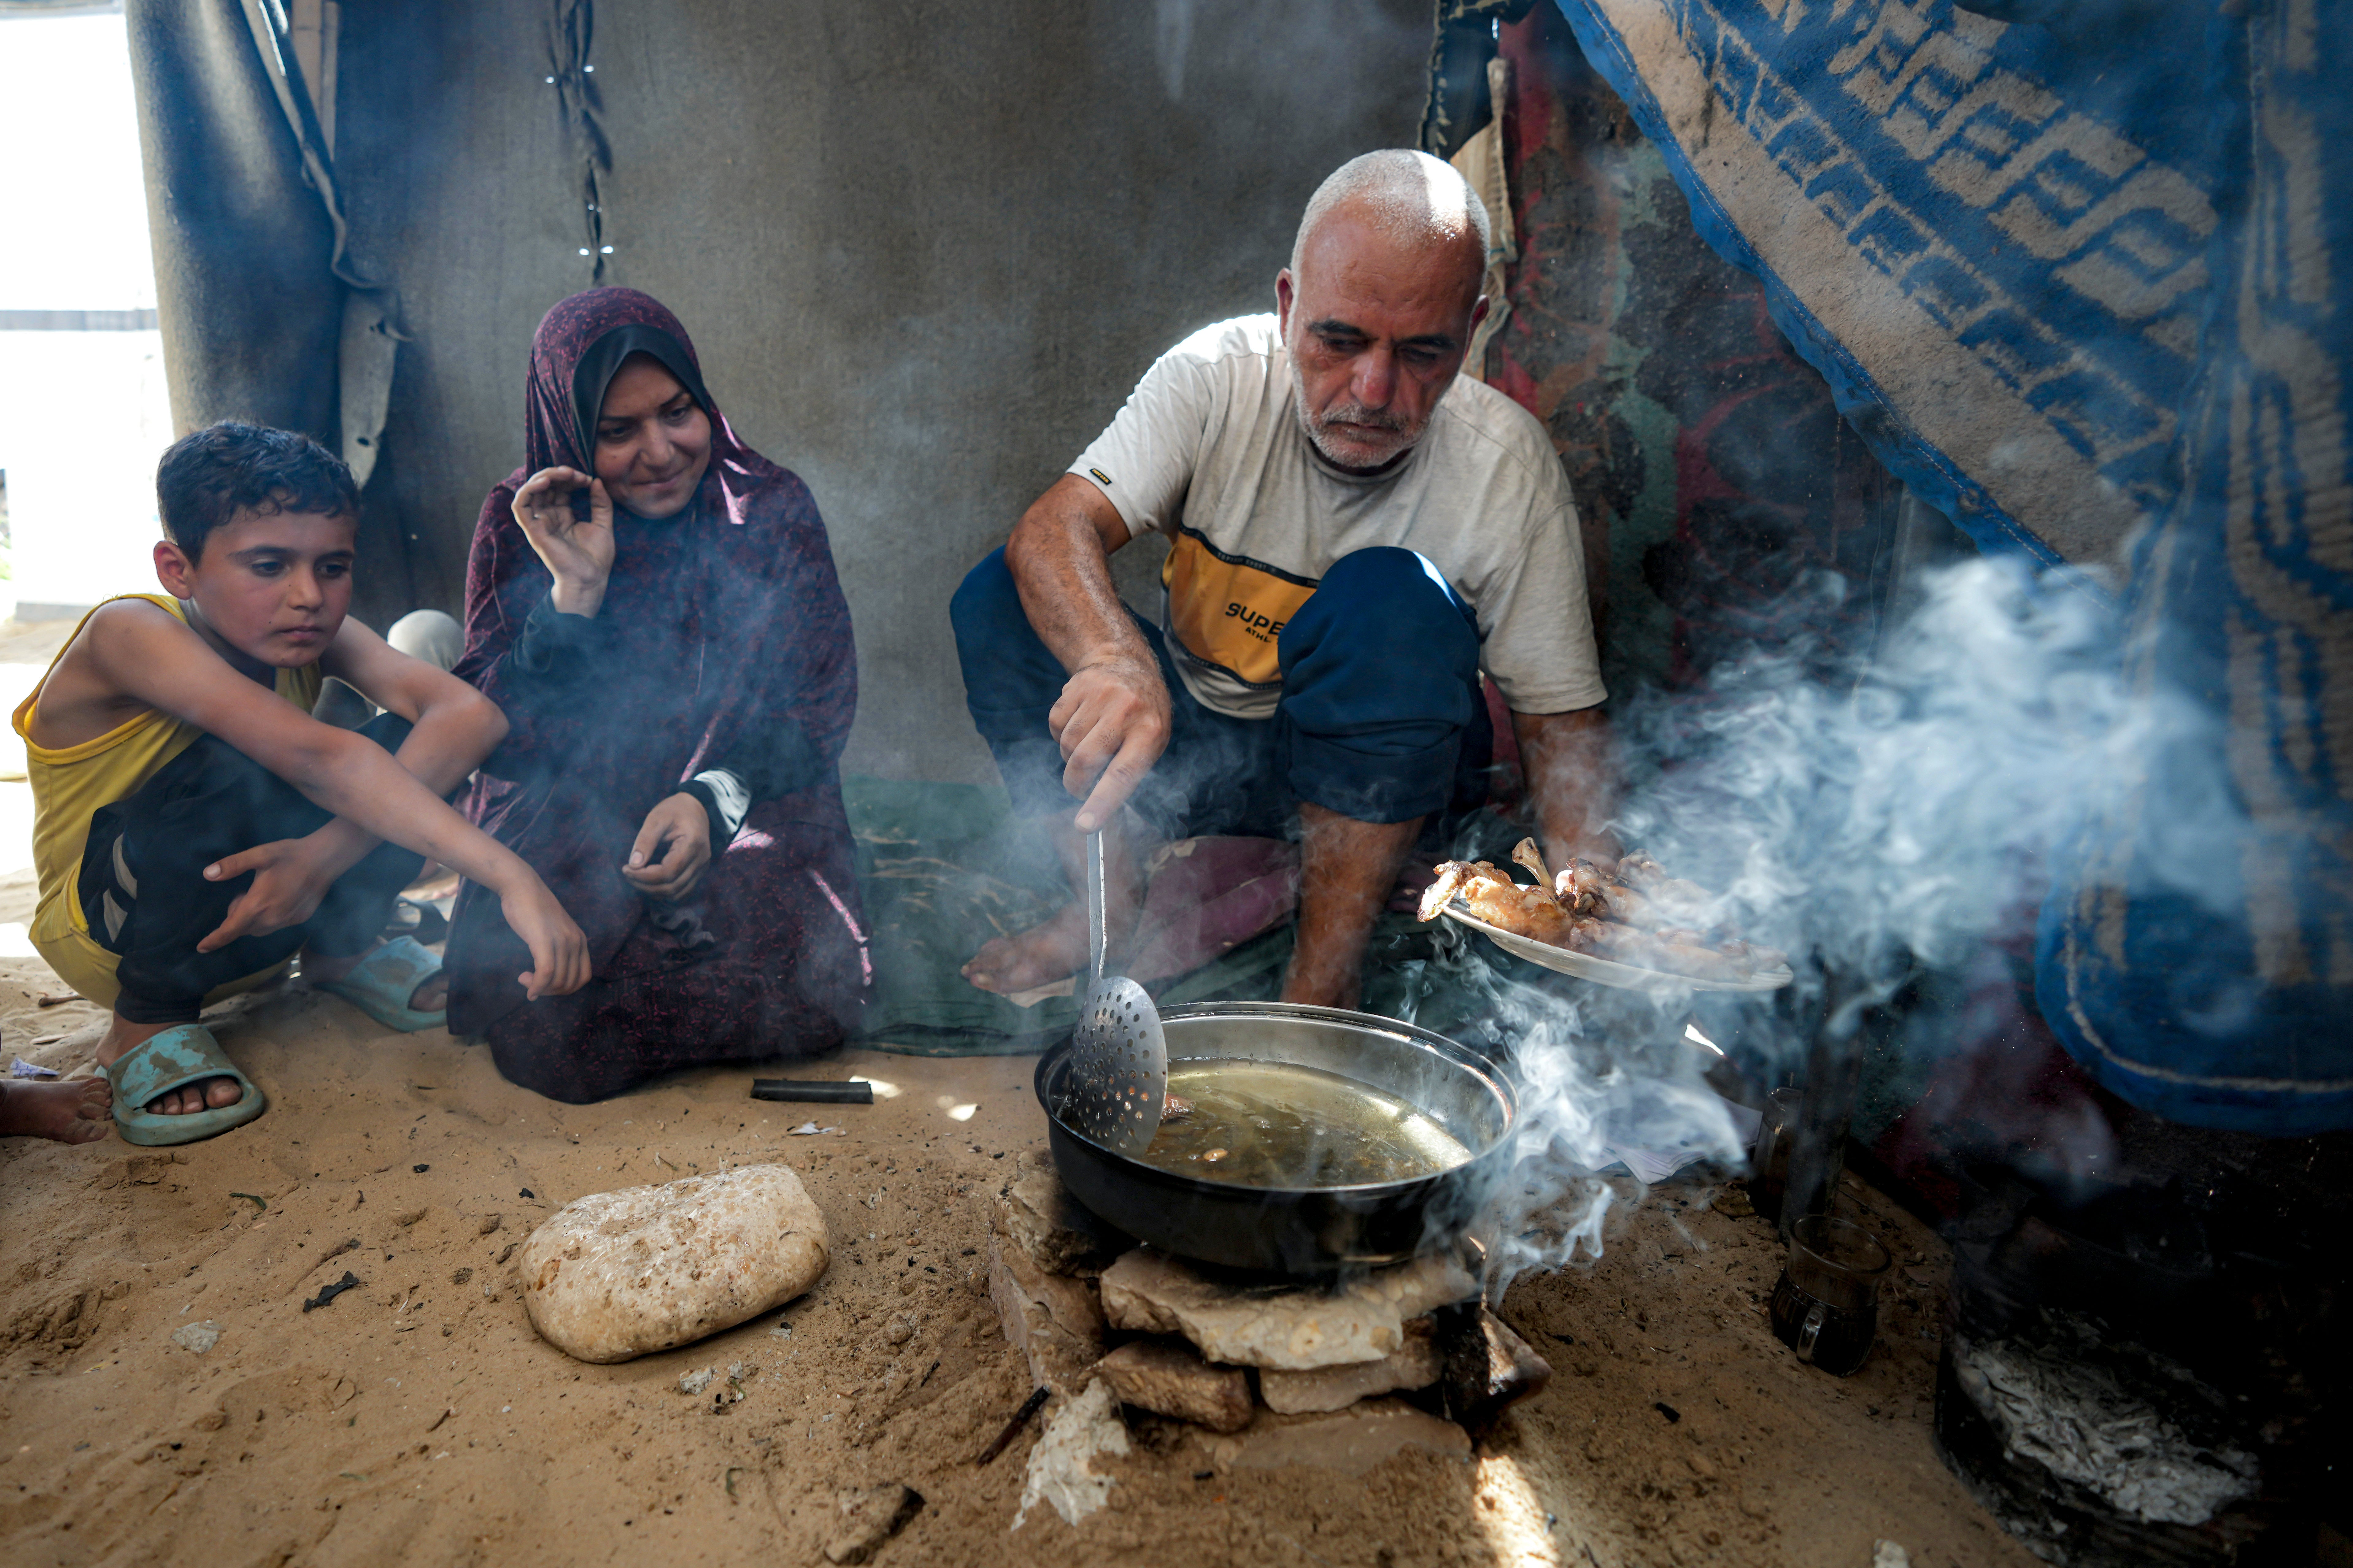 Hassan Nofal, right, who was displaced by the Israeli bombardment of the Gaza Strip, prepares lunch with his family at a makeshift tent camp in Khan Younis